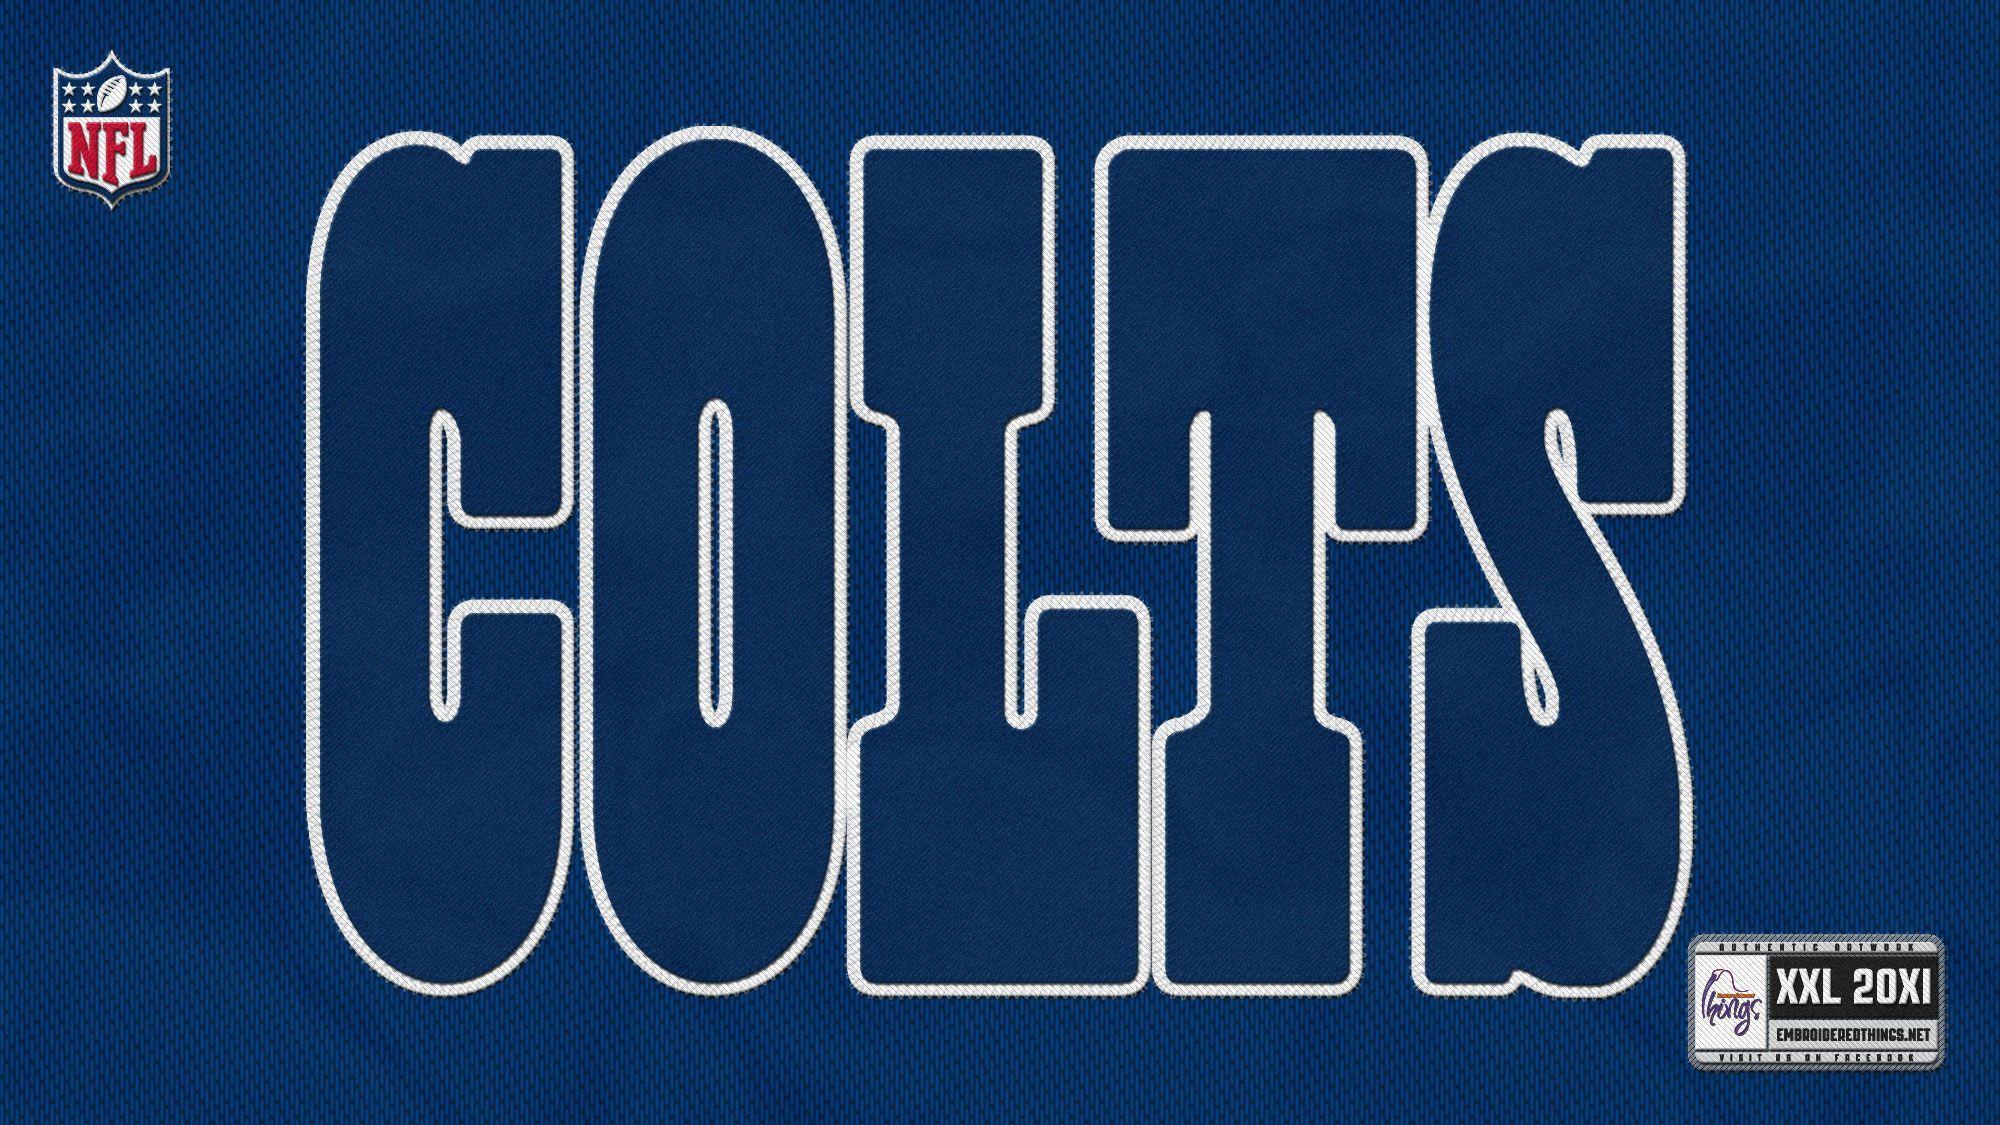 Indianapolis Colts wallpapers HD image